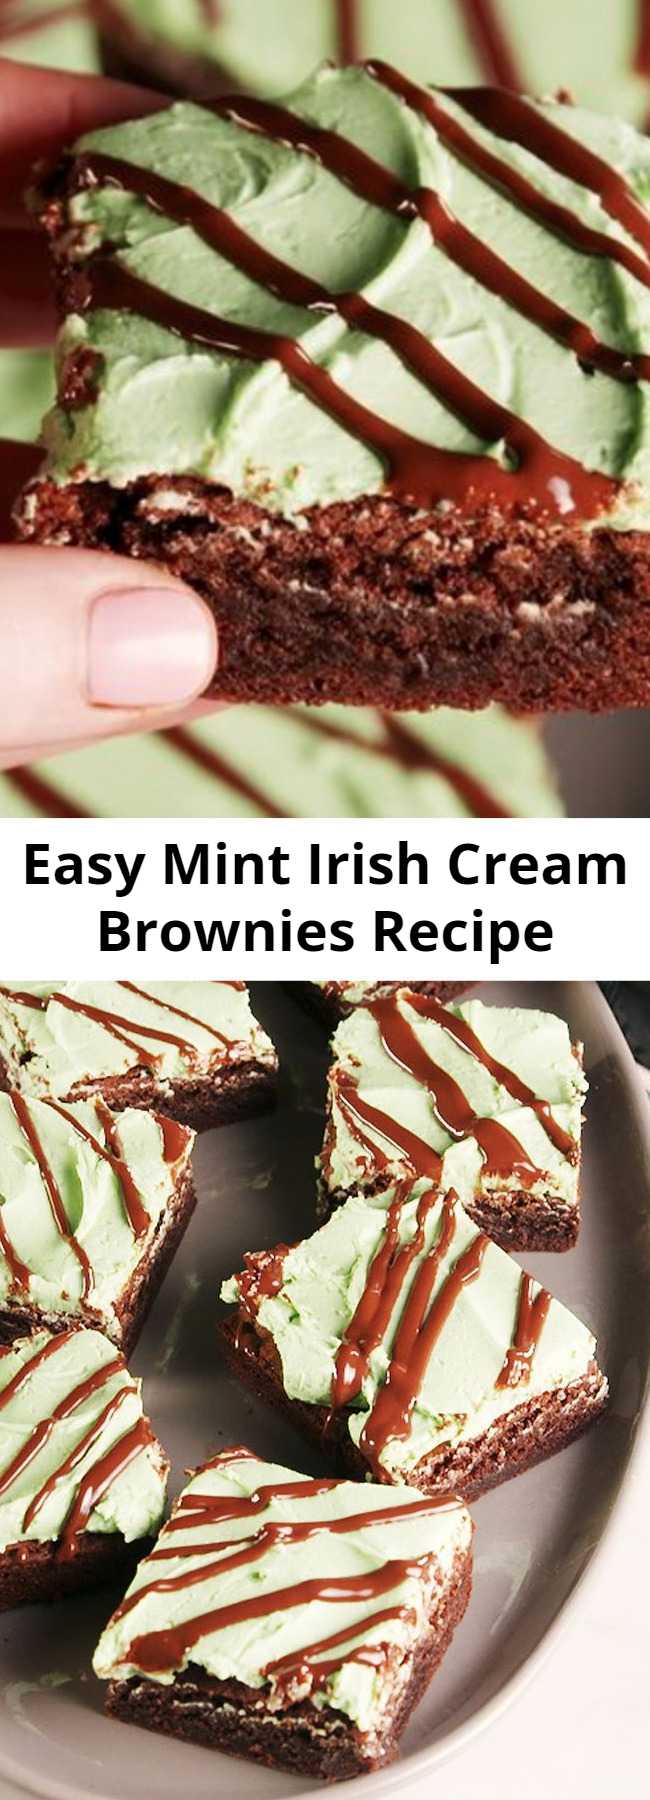 Easy Mint Irish Cream Brownies Recipe - Baileys fans will be OBSESSED with these Mint Irish Cream Brownies. #recipe #easy #easyrecipes #brownies #chocolate #bialeys #baking #mint #dessert #dessertrecipes